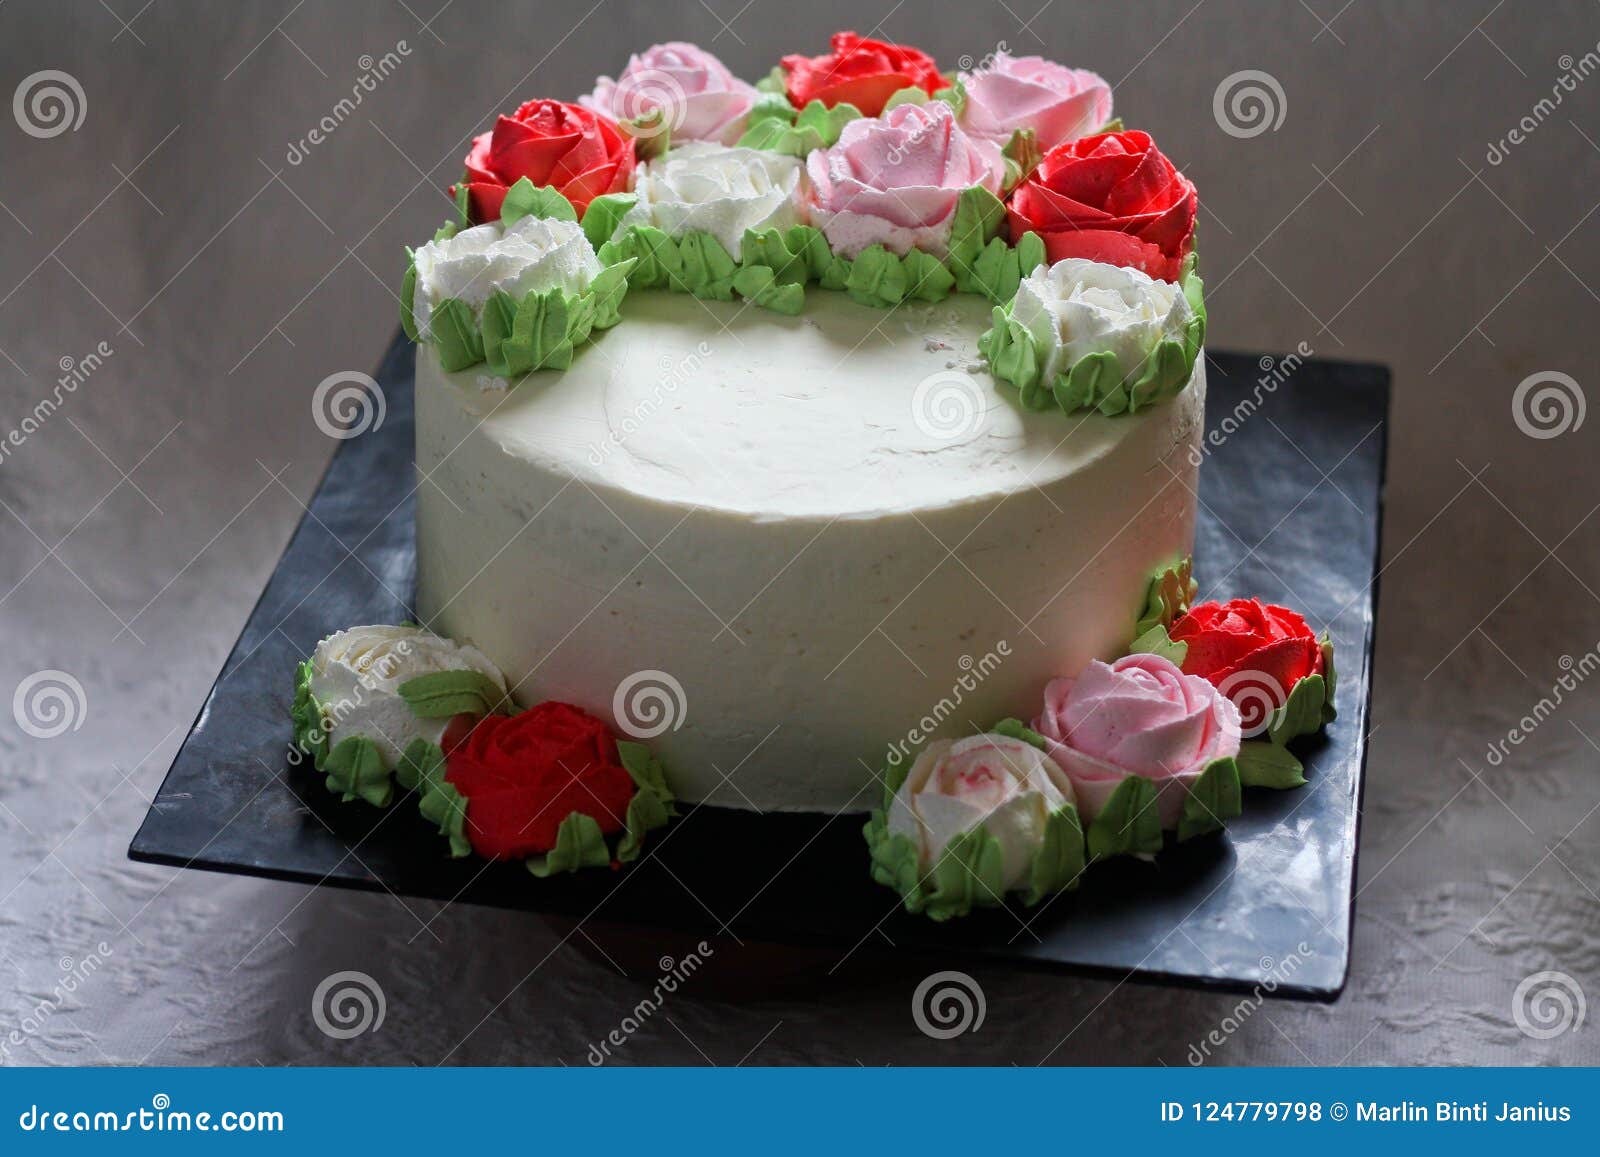 Simple Rose Swirl Cake by KirstysCakes on DeviantArt